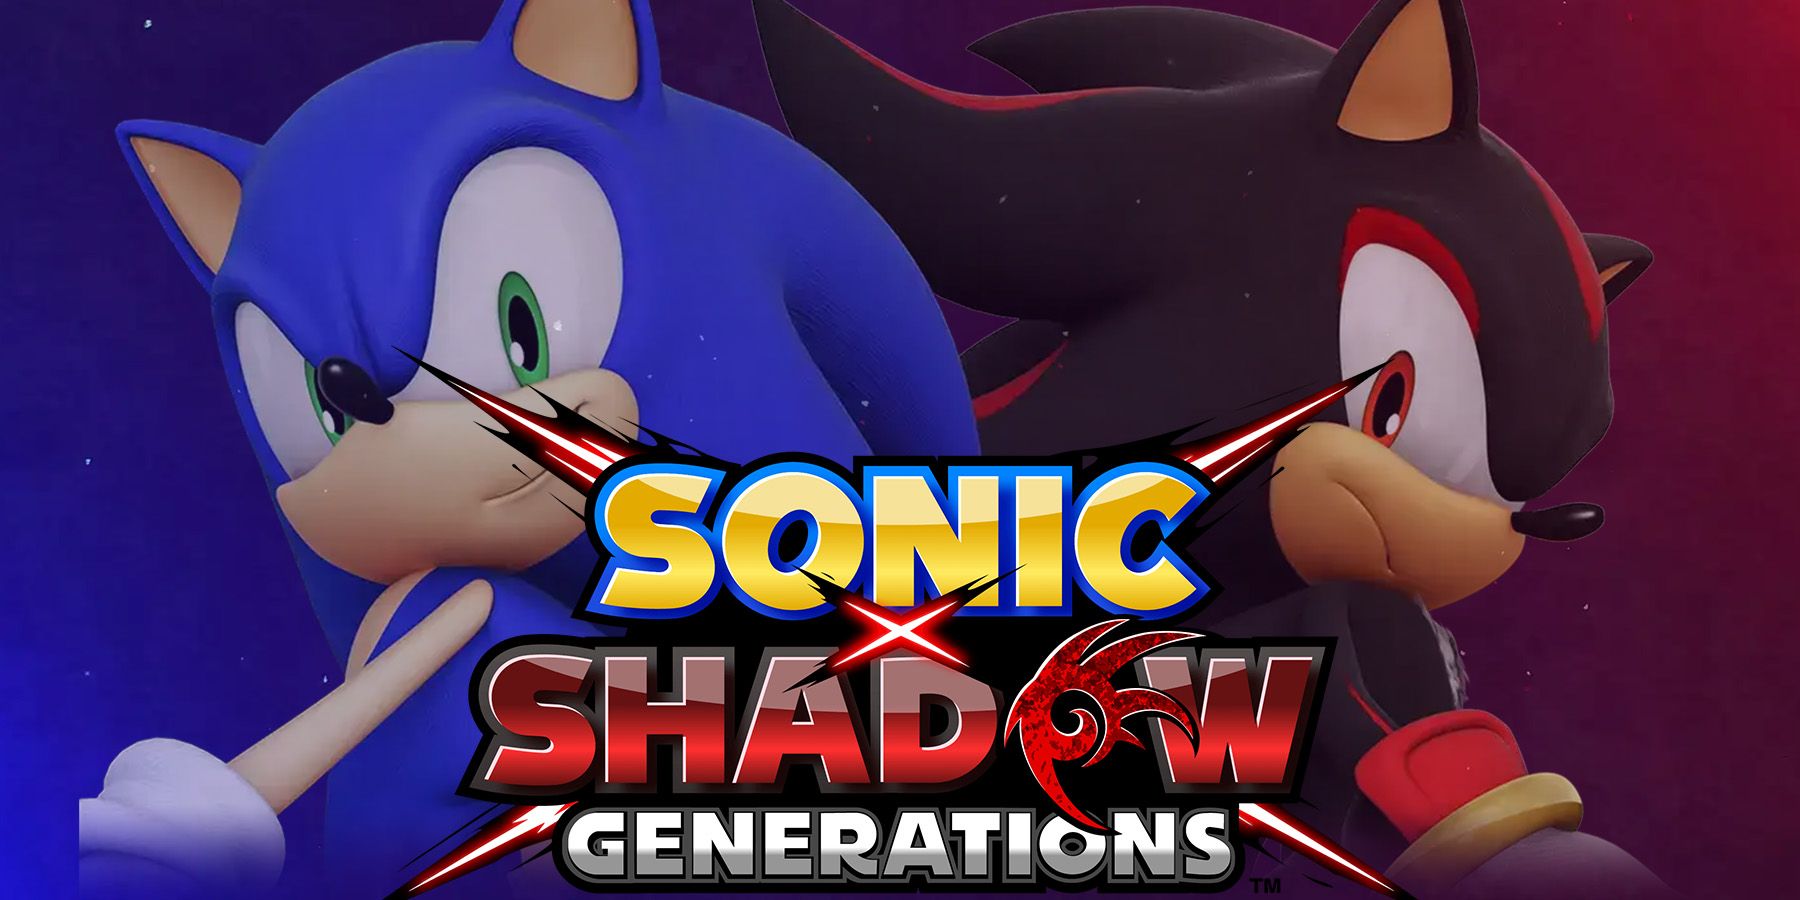 Sonic x Shadow Generations hero artwork with game logo in 2x1 aspect ratio